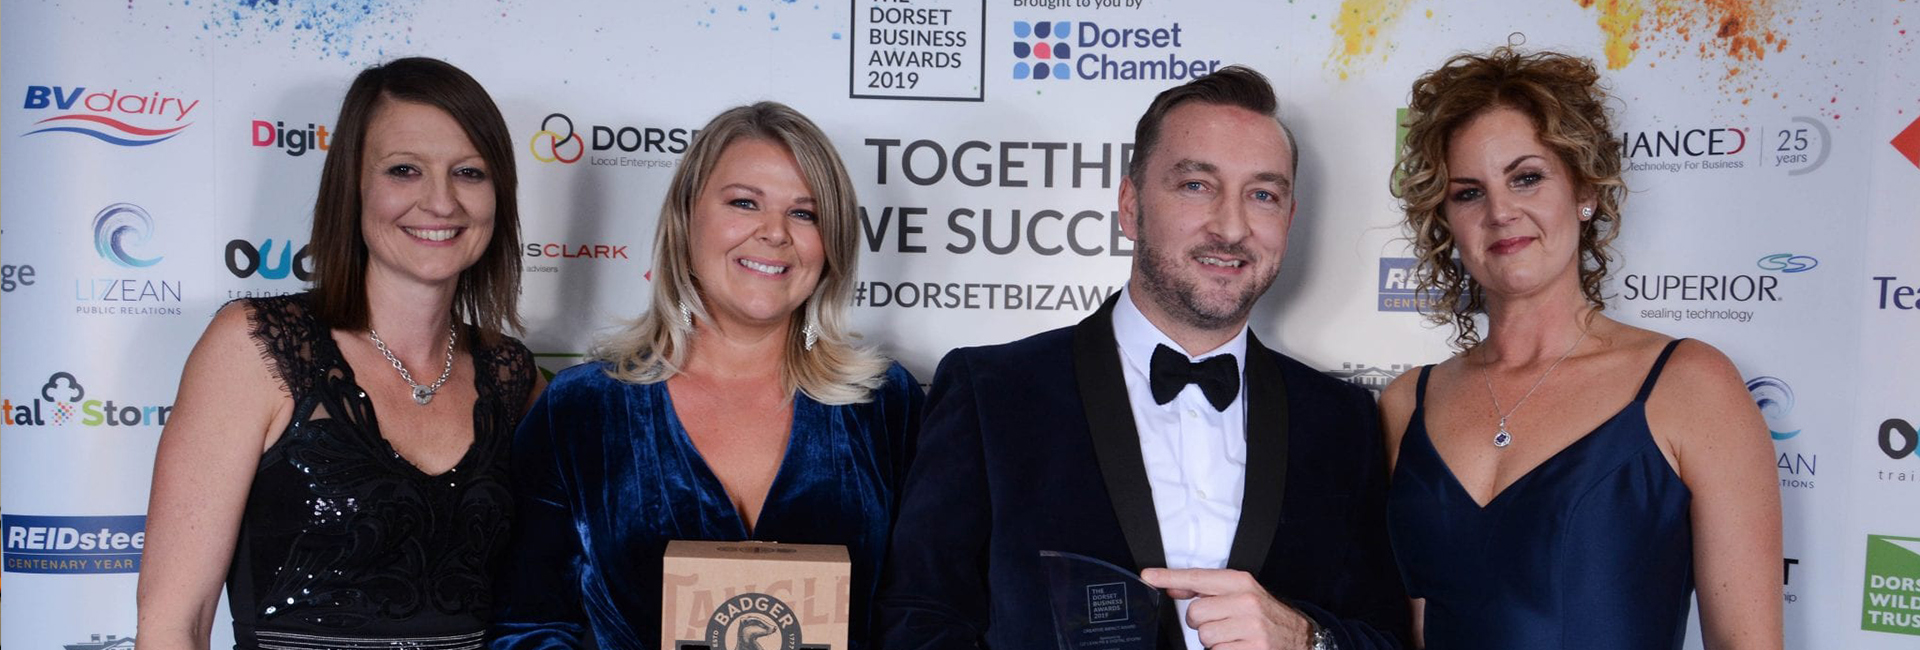 Digital Storm reflects on the 25th Dorset Business Awards